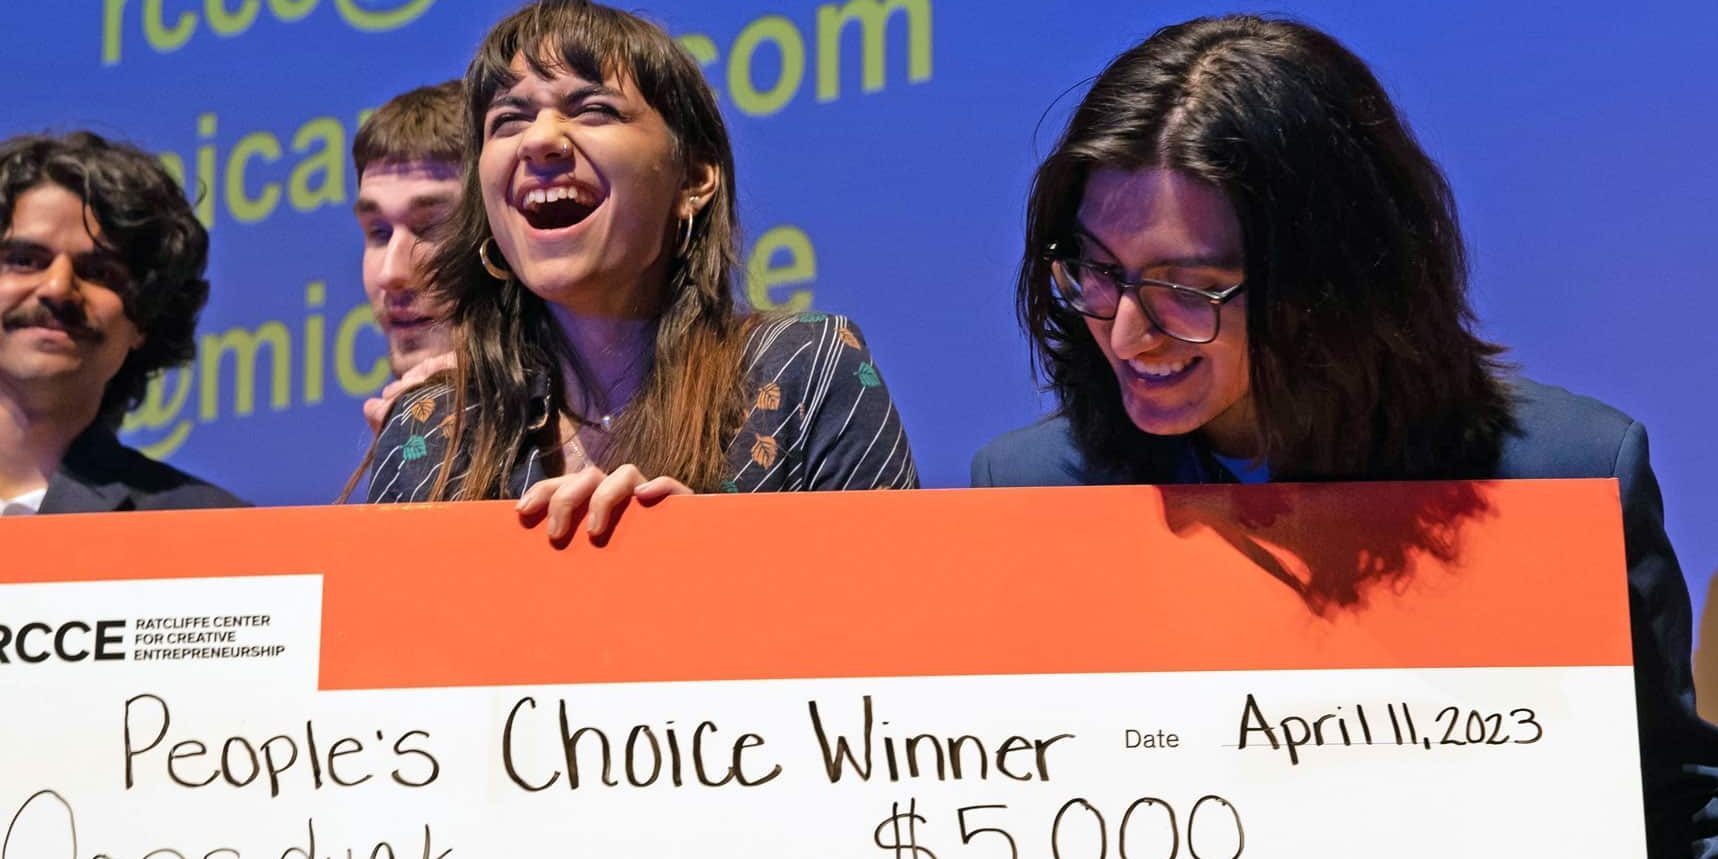 Event Photography example: two students are holding a large check for $5,000 that they were just awarded on stage. They are smiling and looking incredibly happy.